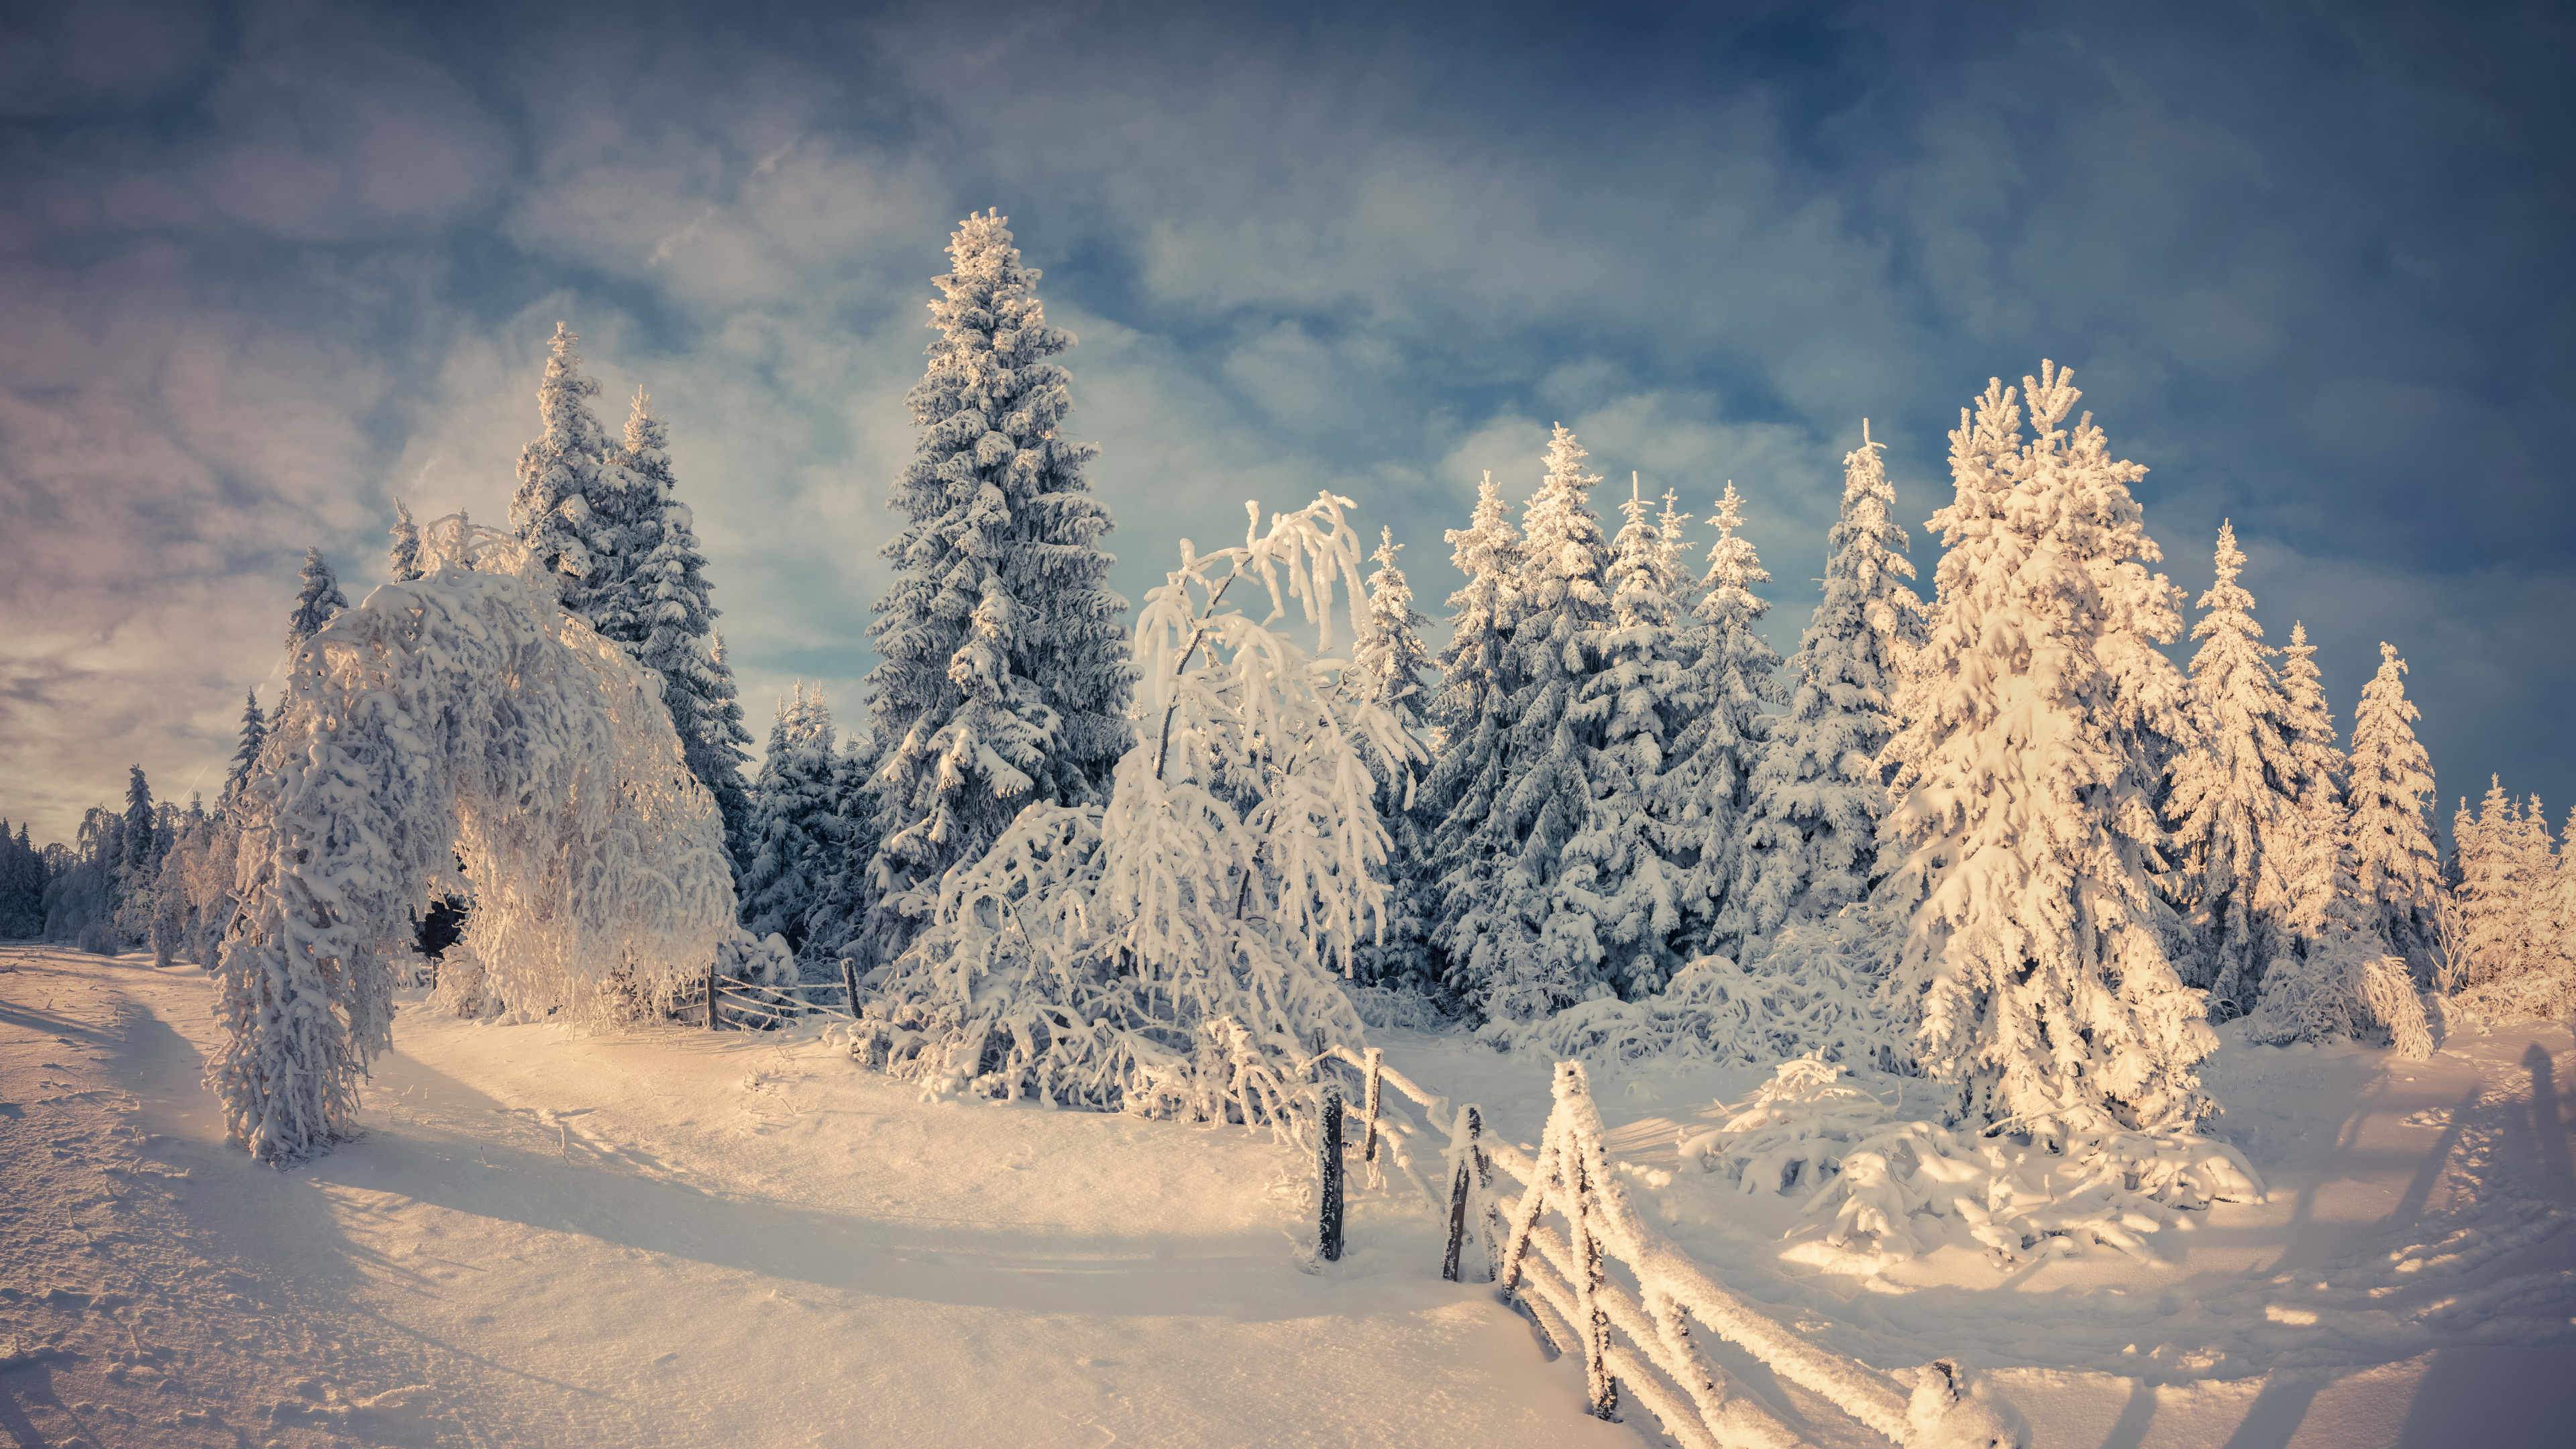 Snow Covered Trees and Mountains During Daytime. Wallpaper in 3840x2160 Resolution